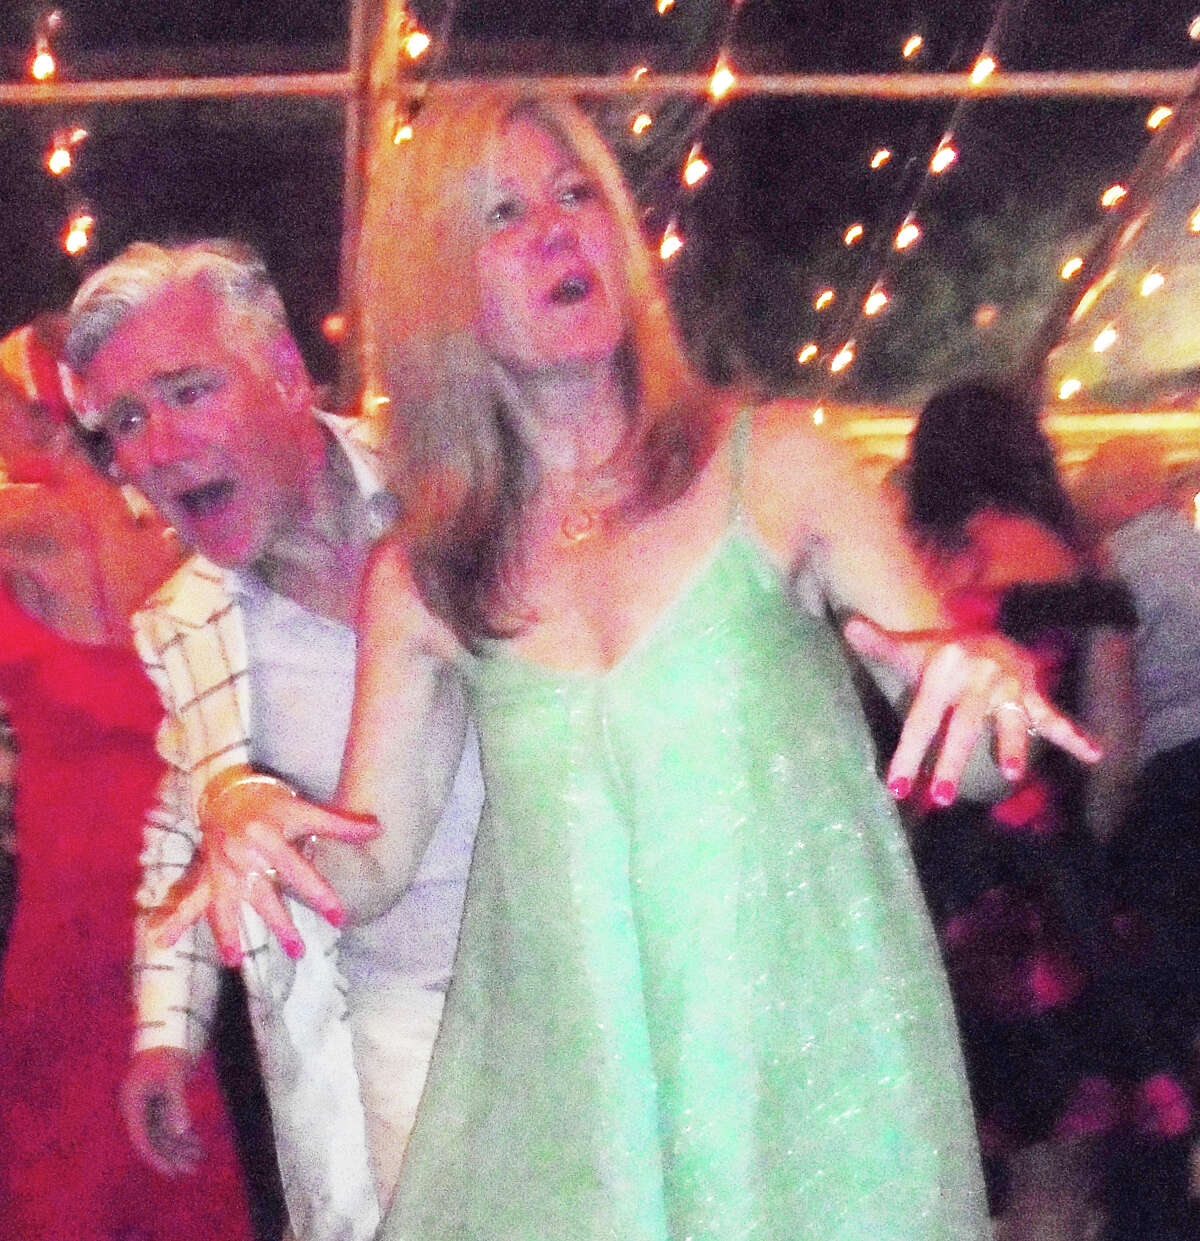 Julia and Steve Kempson of Westport were front and center on the dance floor at Club Havana gala Saturday sponosred by the Westport Arts Center.